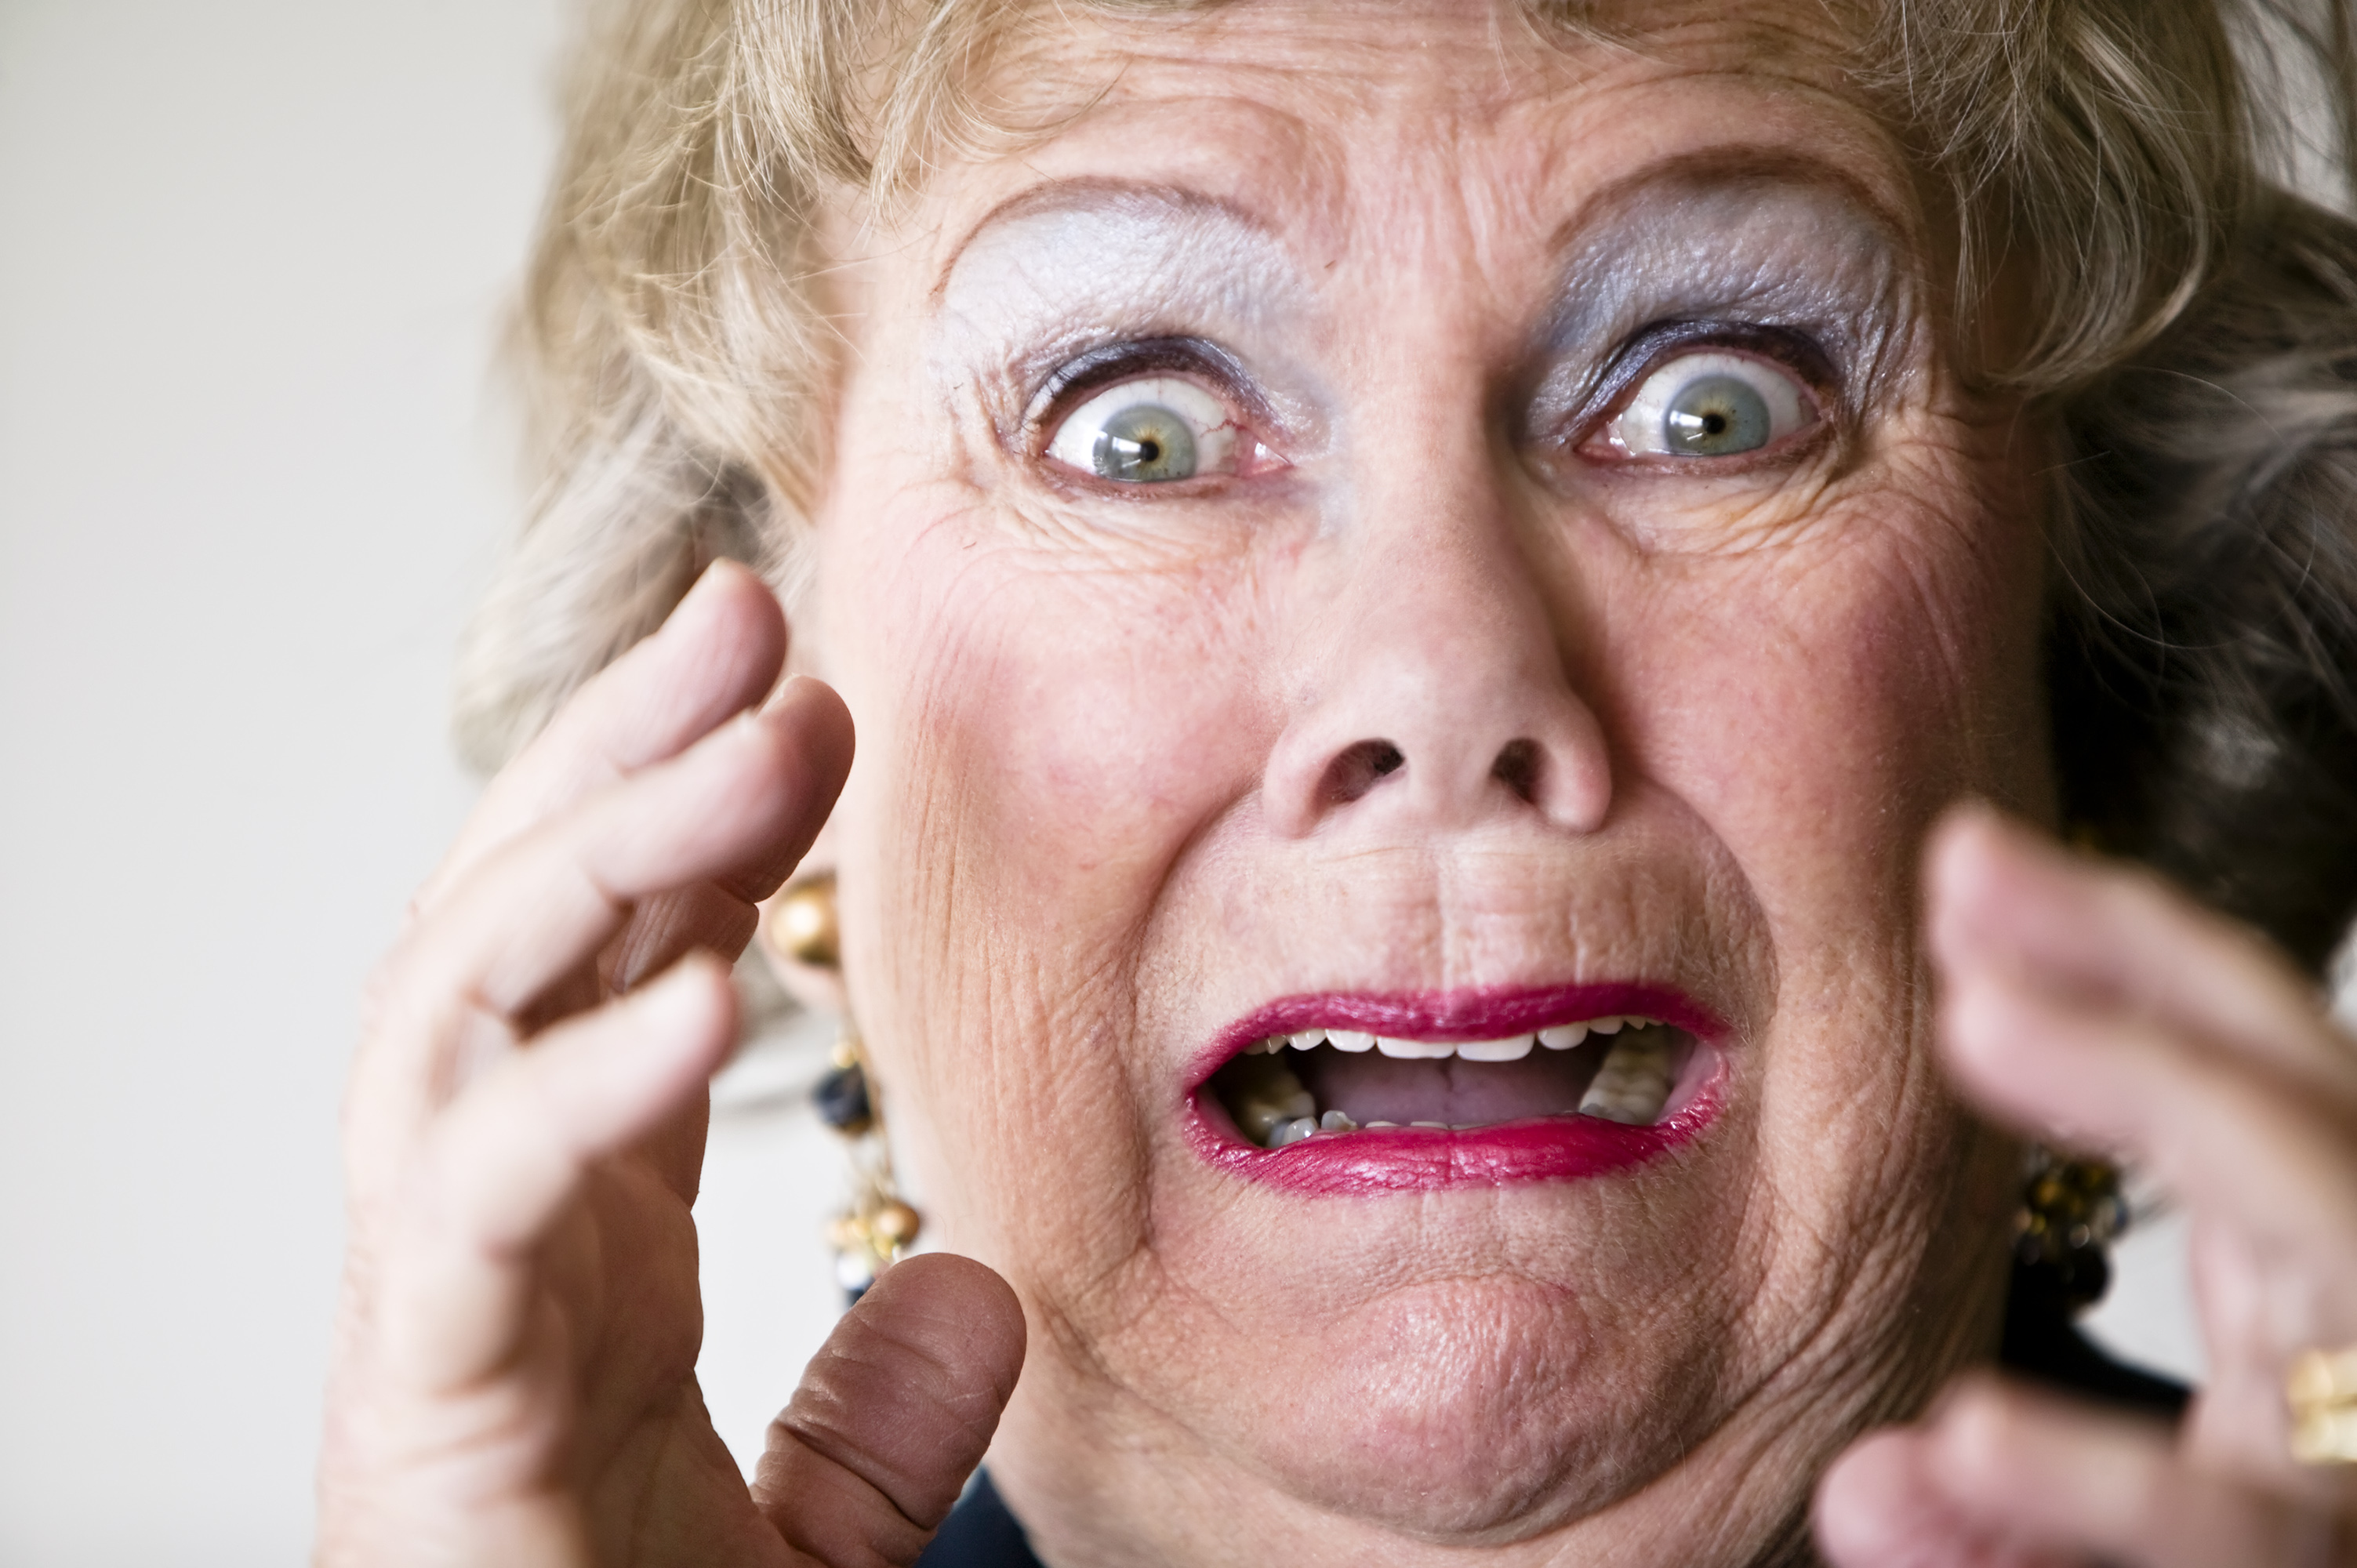 A terrified elderly woman | Source: Getty Images